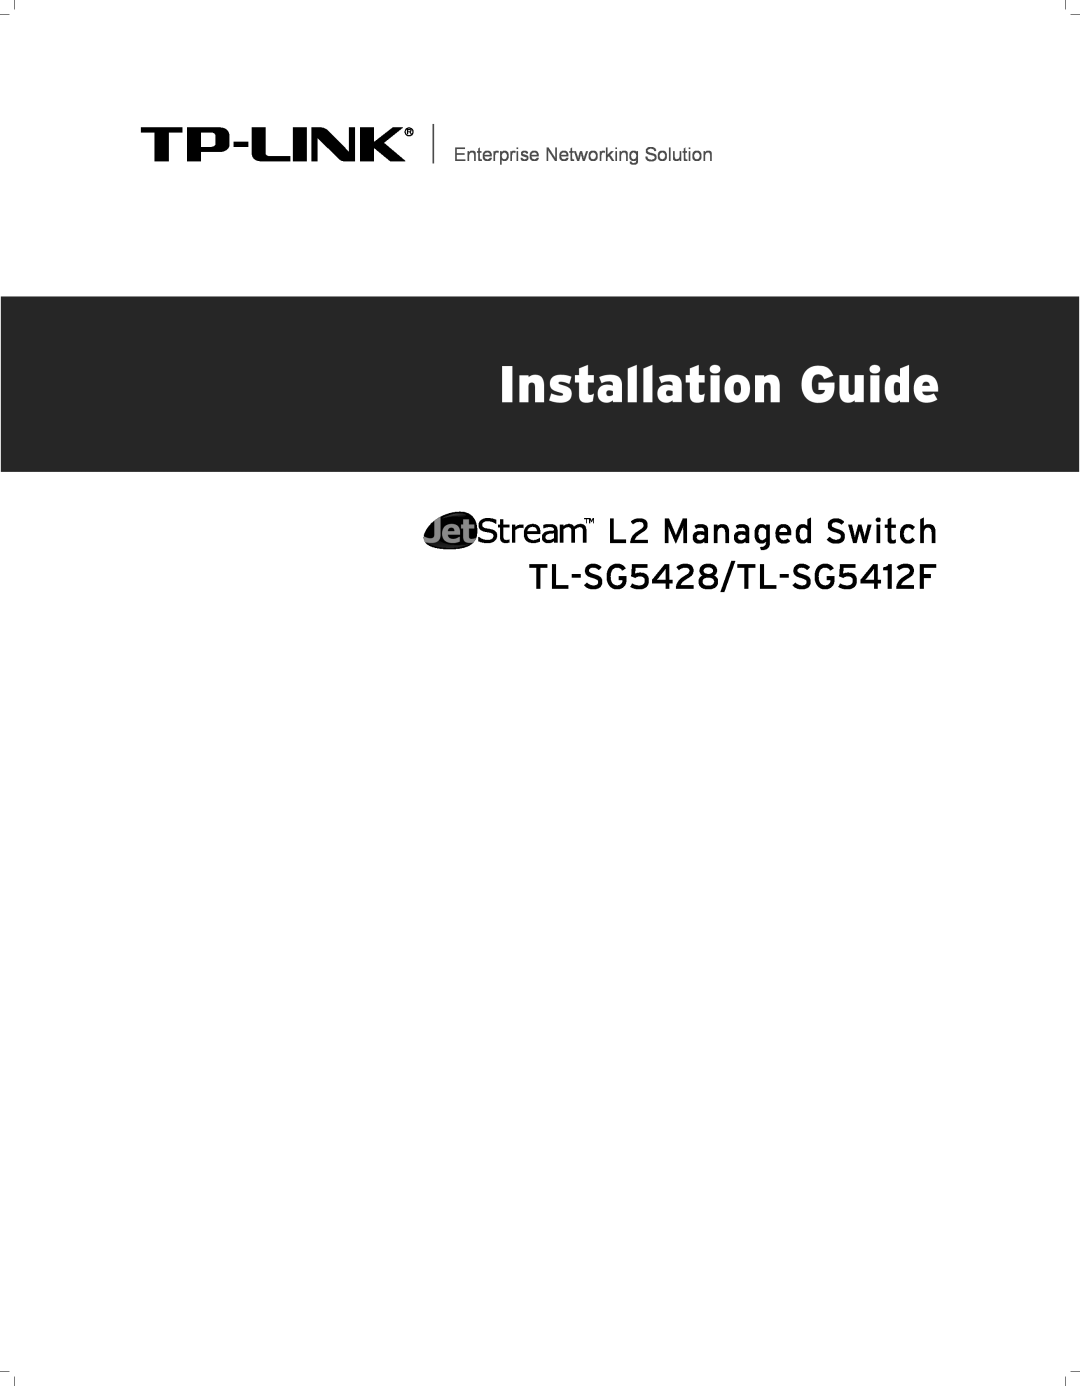 TP-Link manual Installation Guide, L2 Managed Switch TL-SG5428/TL-SG5412F, Enterprise Networking Solution 